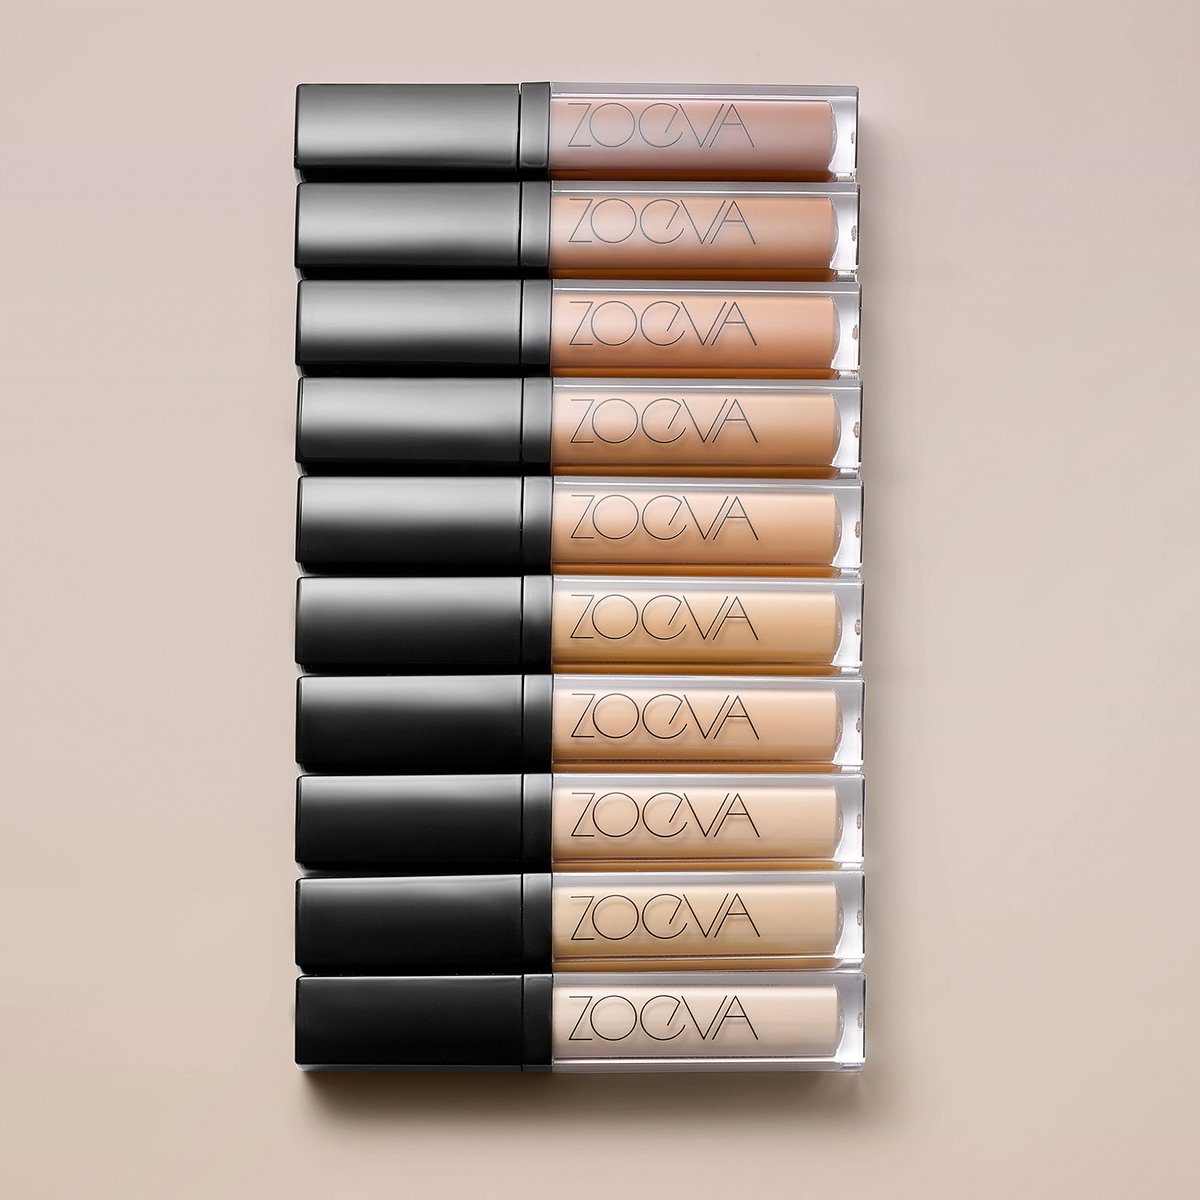 ZOEVA Cosmetics auf Twitter: „💓 Tell your unique story, beautifully with  our Authentik Skin Perfector Concealer. Choose from 30 inclusive shades in  neutral, peachy, or yellow undertone. Visit https://t.co/XIPMGGXXho to view  our